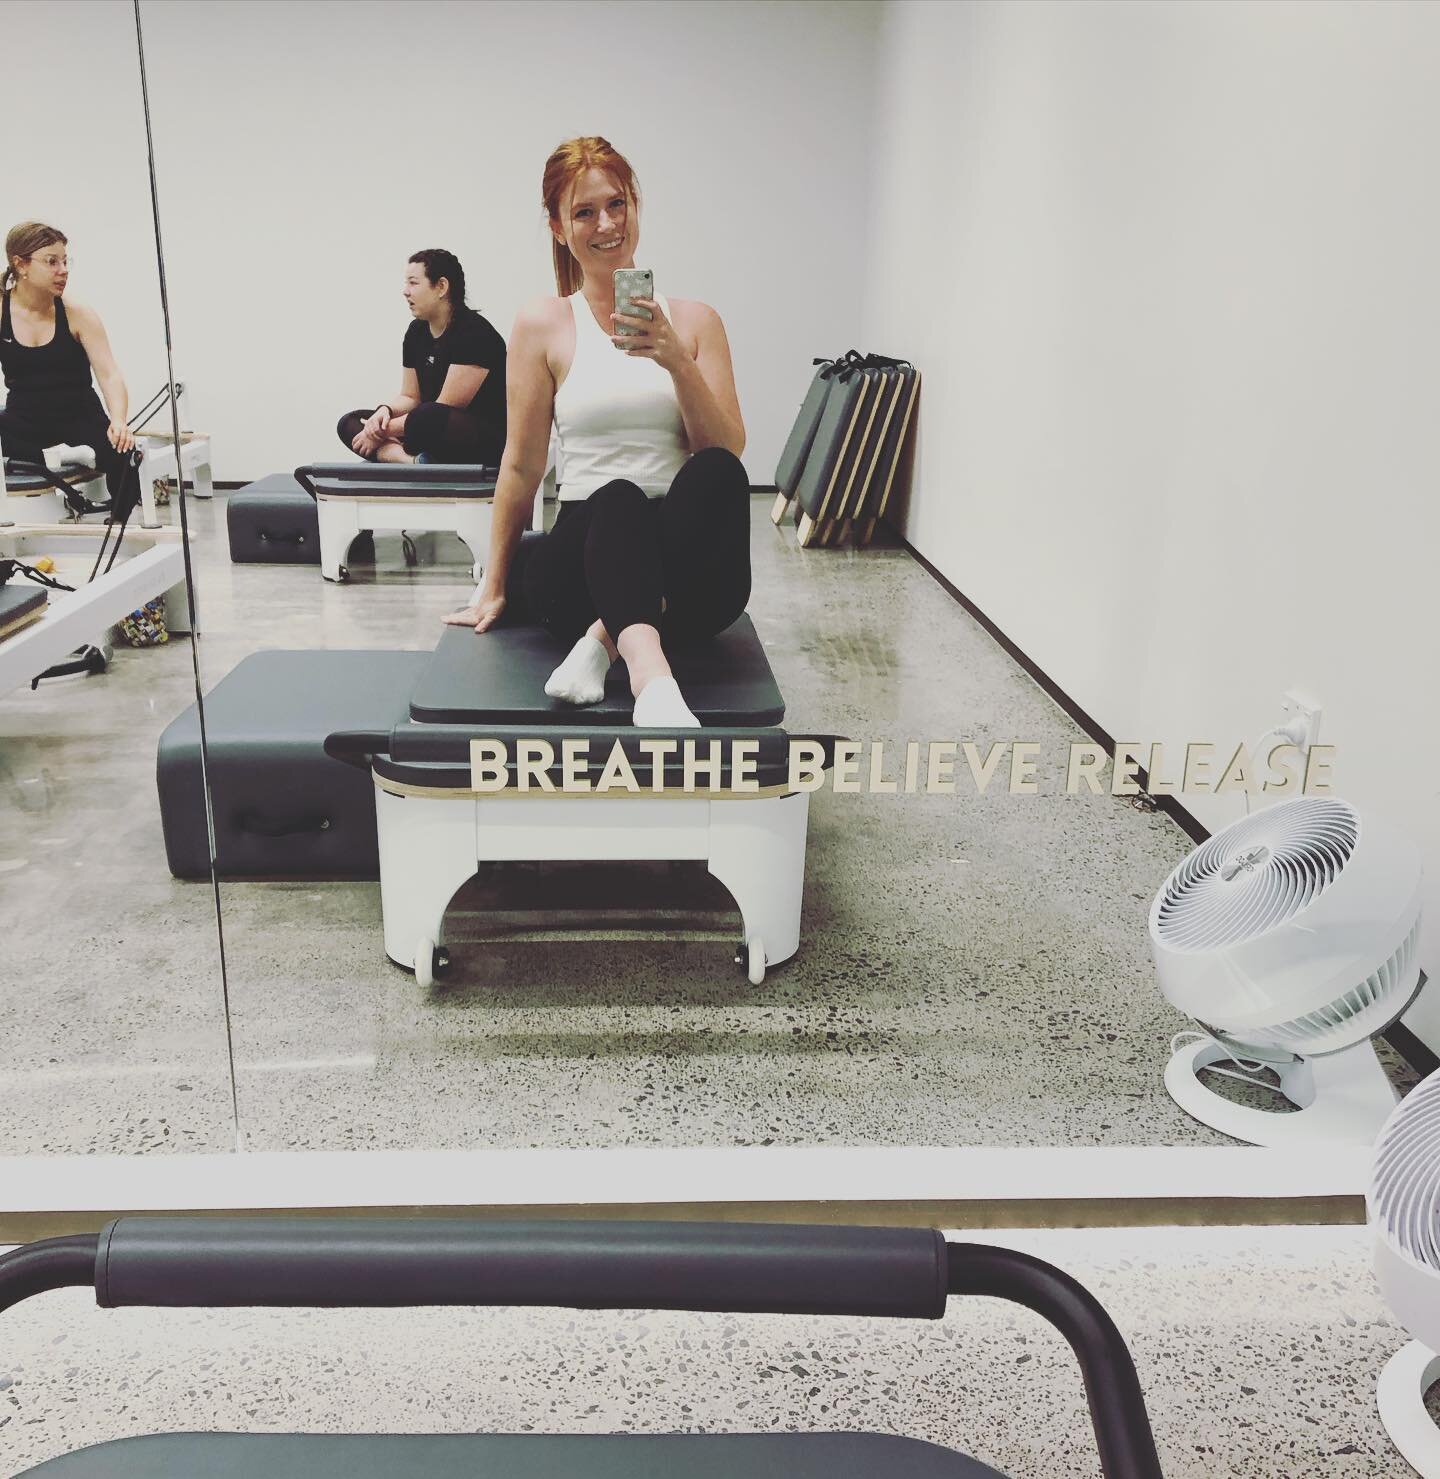 Hey everyone! 💪 Just had an amazing first workout back at the beautiful new reformer pilates studio in town and I am feeling fantastic! 

If you're looking for a low-impact workout that will help you get back into your fitness routine, then this is 